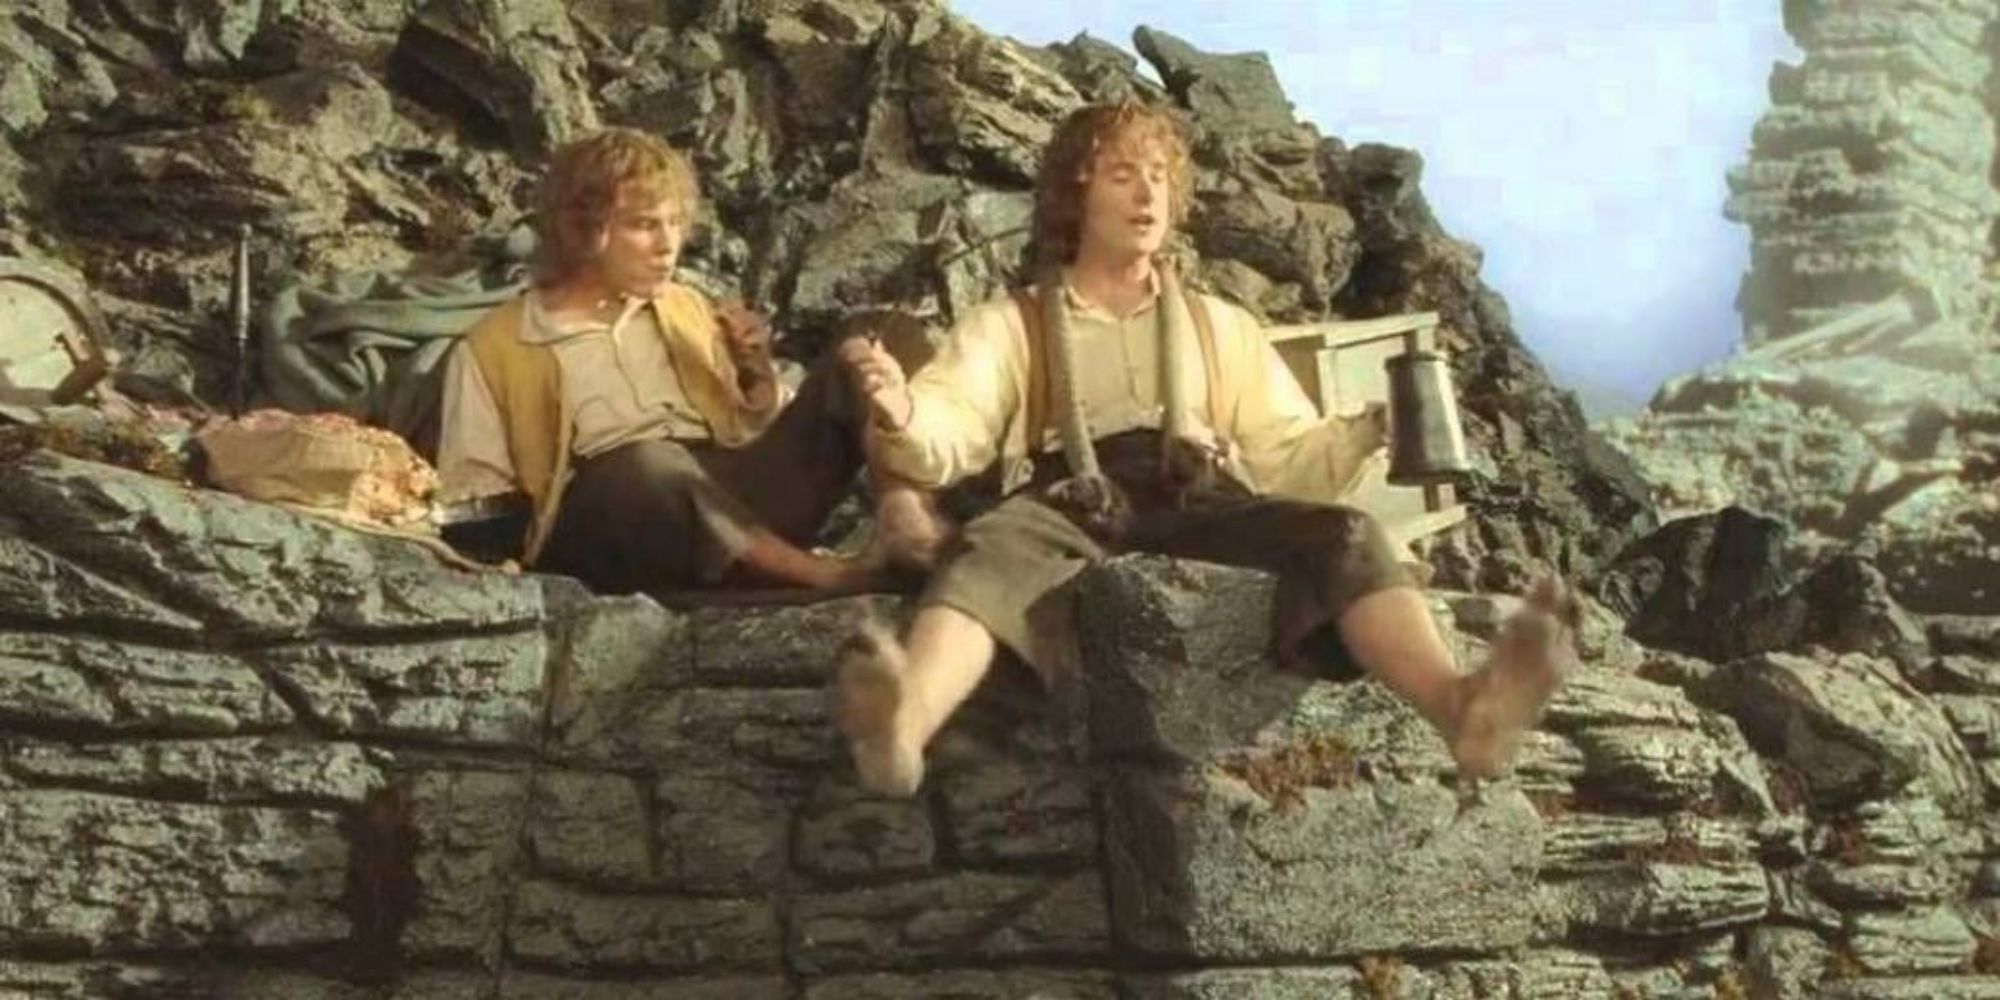 Merry and Pippin drinking on the ruins of Isengaard in The Lord of the Rings The Return of the King (1)